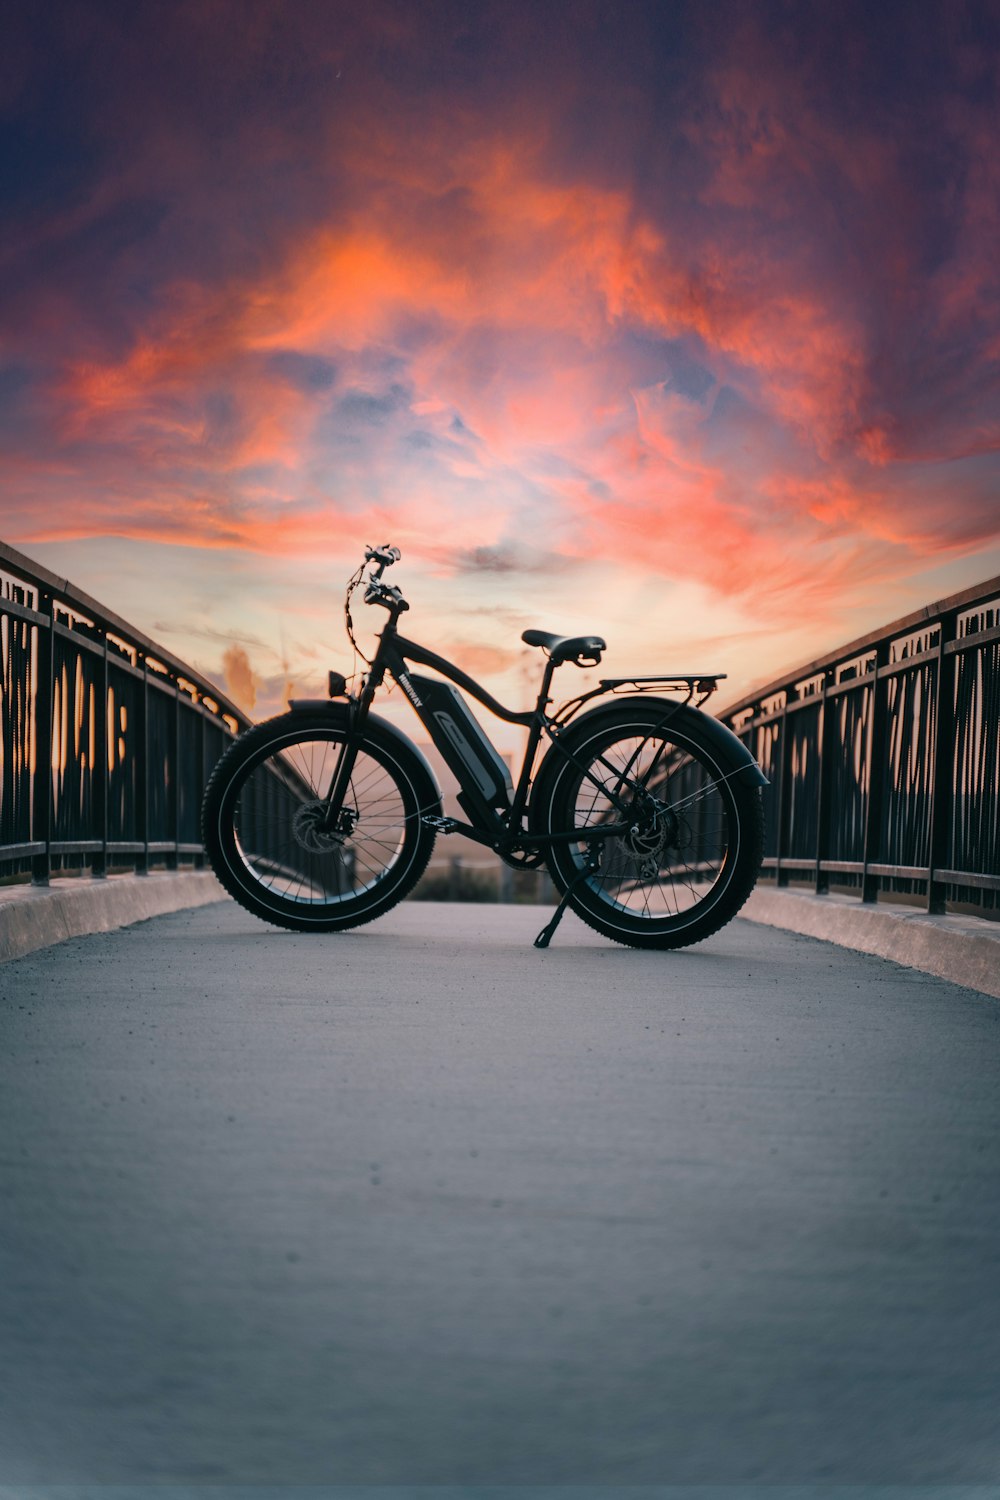 a bicycle parked on a bridge with a sunset in the background